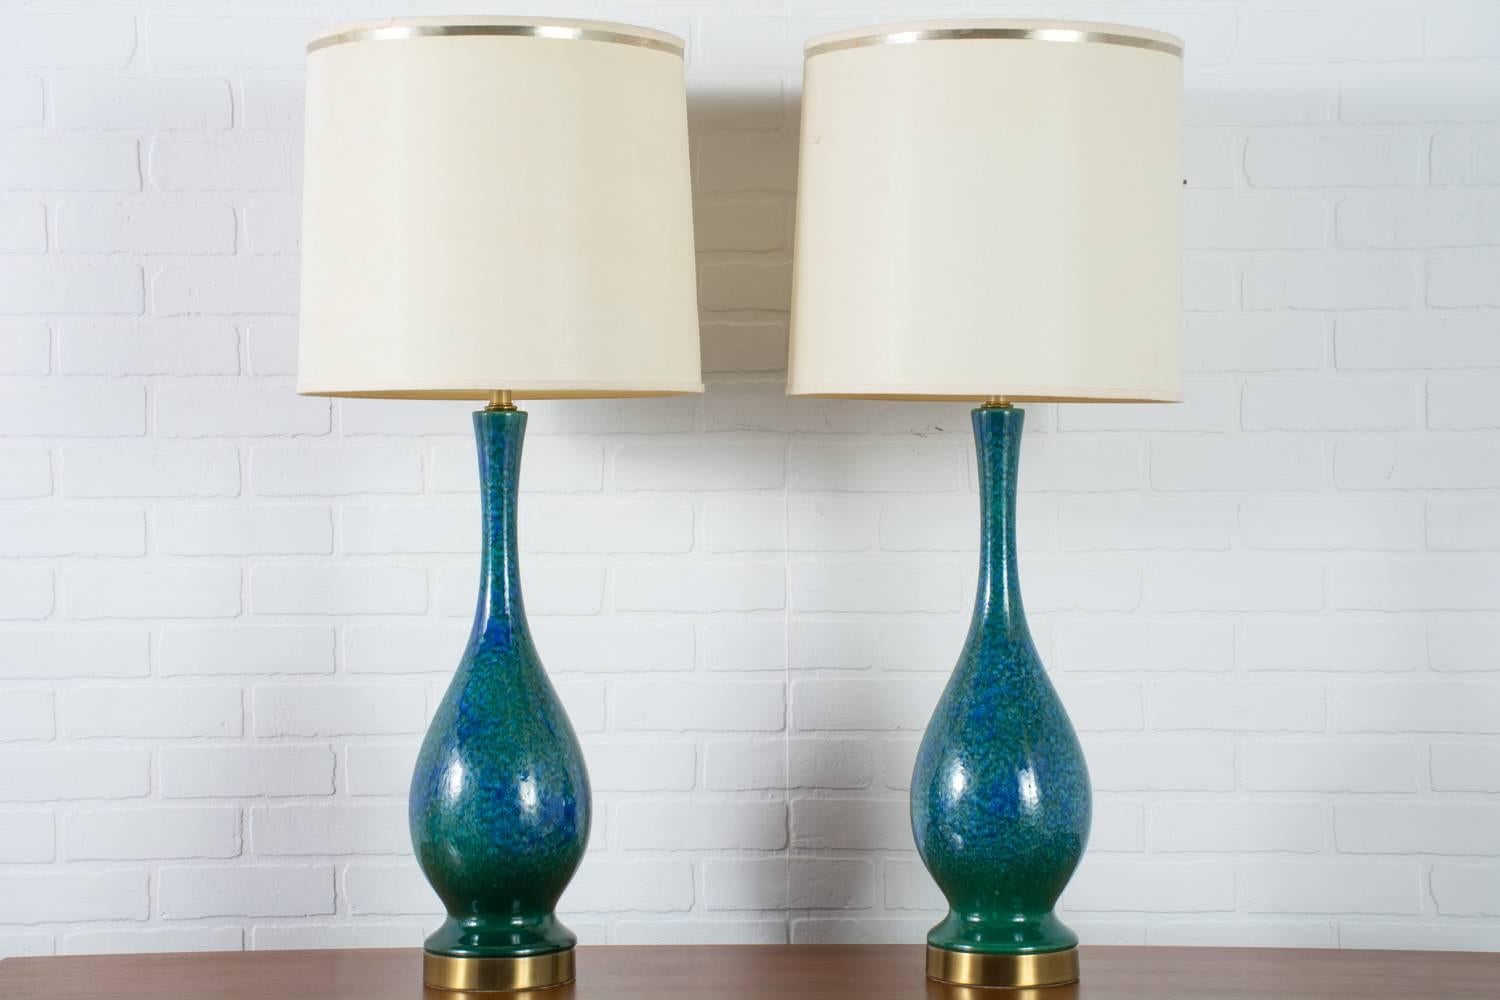 This is a pair of vintage Mid-Century ceramic table lamps glazed in beautiful shades of blue and green. Metal bases have a brass finish. Shades not included.

Measurements: 38 inches H to top of harp (26 inches H to bottom of harp), approximately